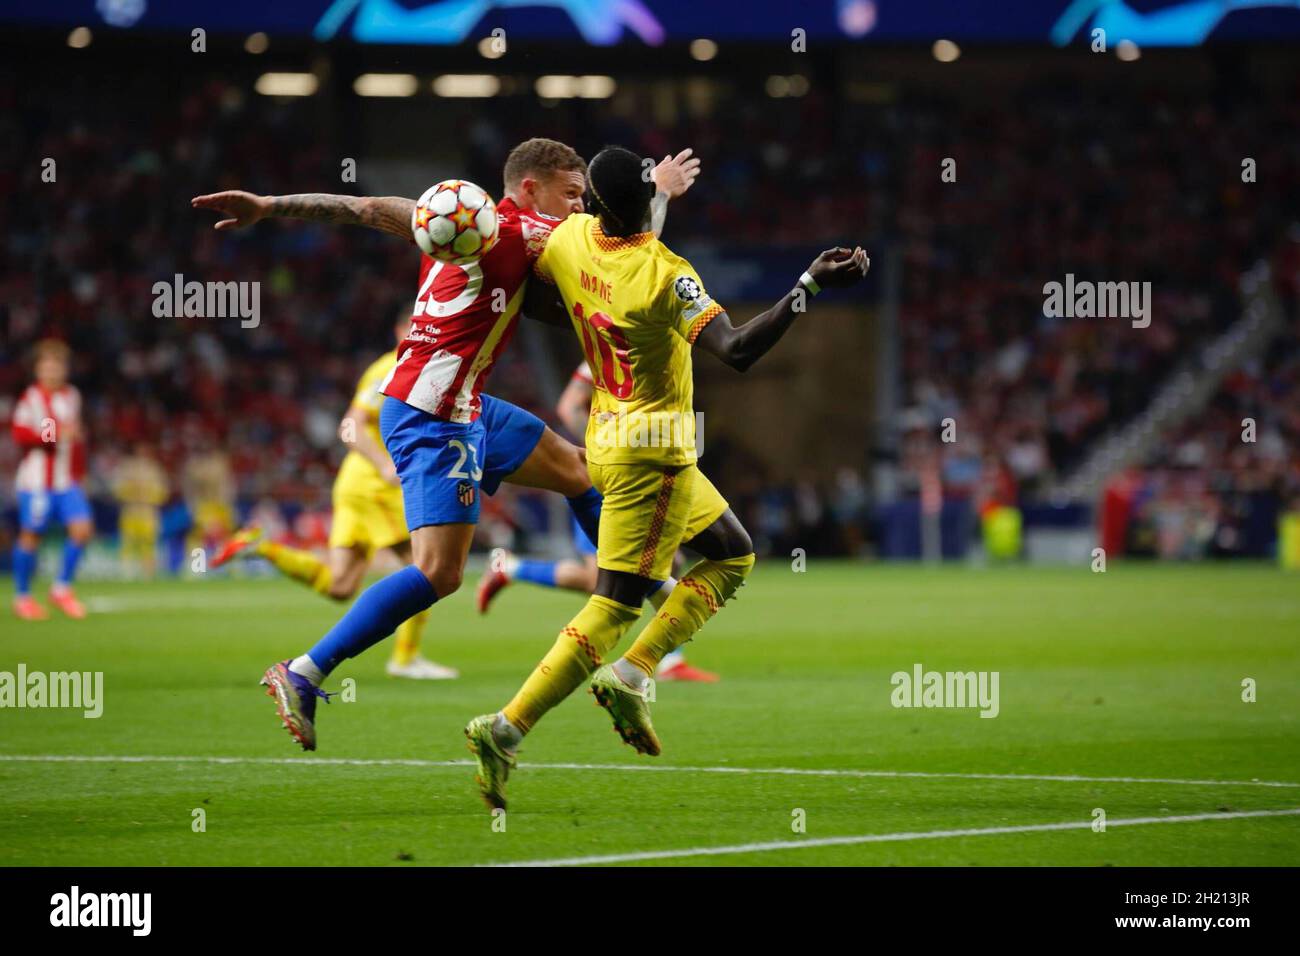 Madrid, Spain. 19th Oct, 2021. Mane from Liverpool FC, during UEFA Champions League Group stage agains Atletico de Madrid at the Wanda Metropolitano stadium. (Photo by: Ivan Abanades Medina Credit: CORDON PRESS/Alamy Live News Stock Photo